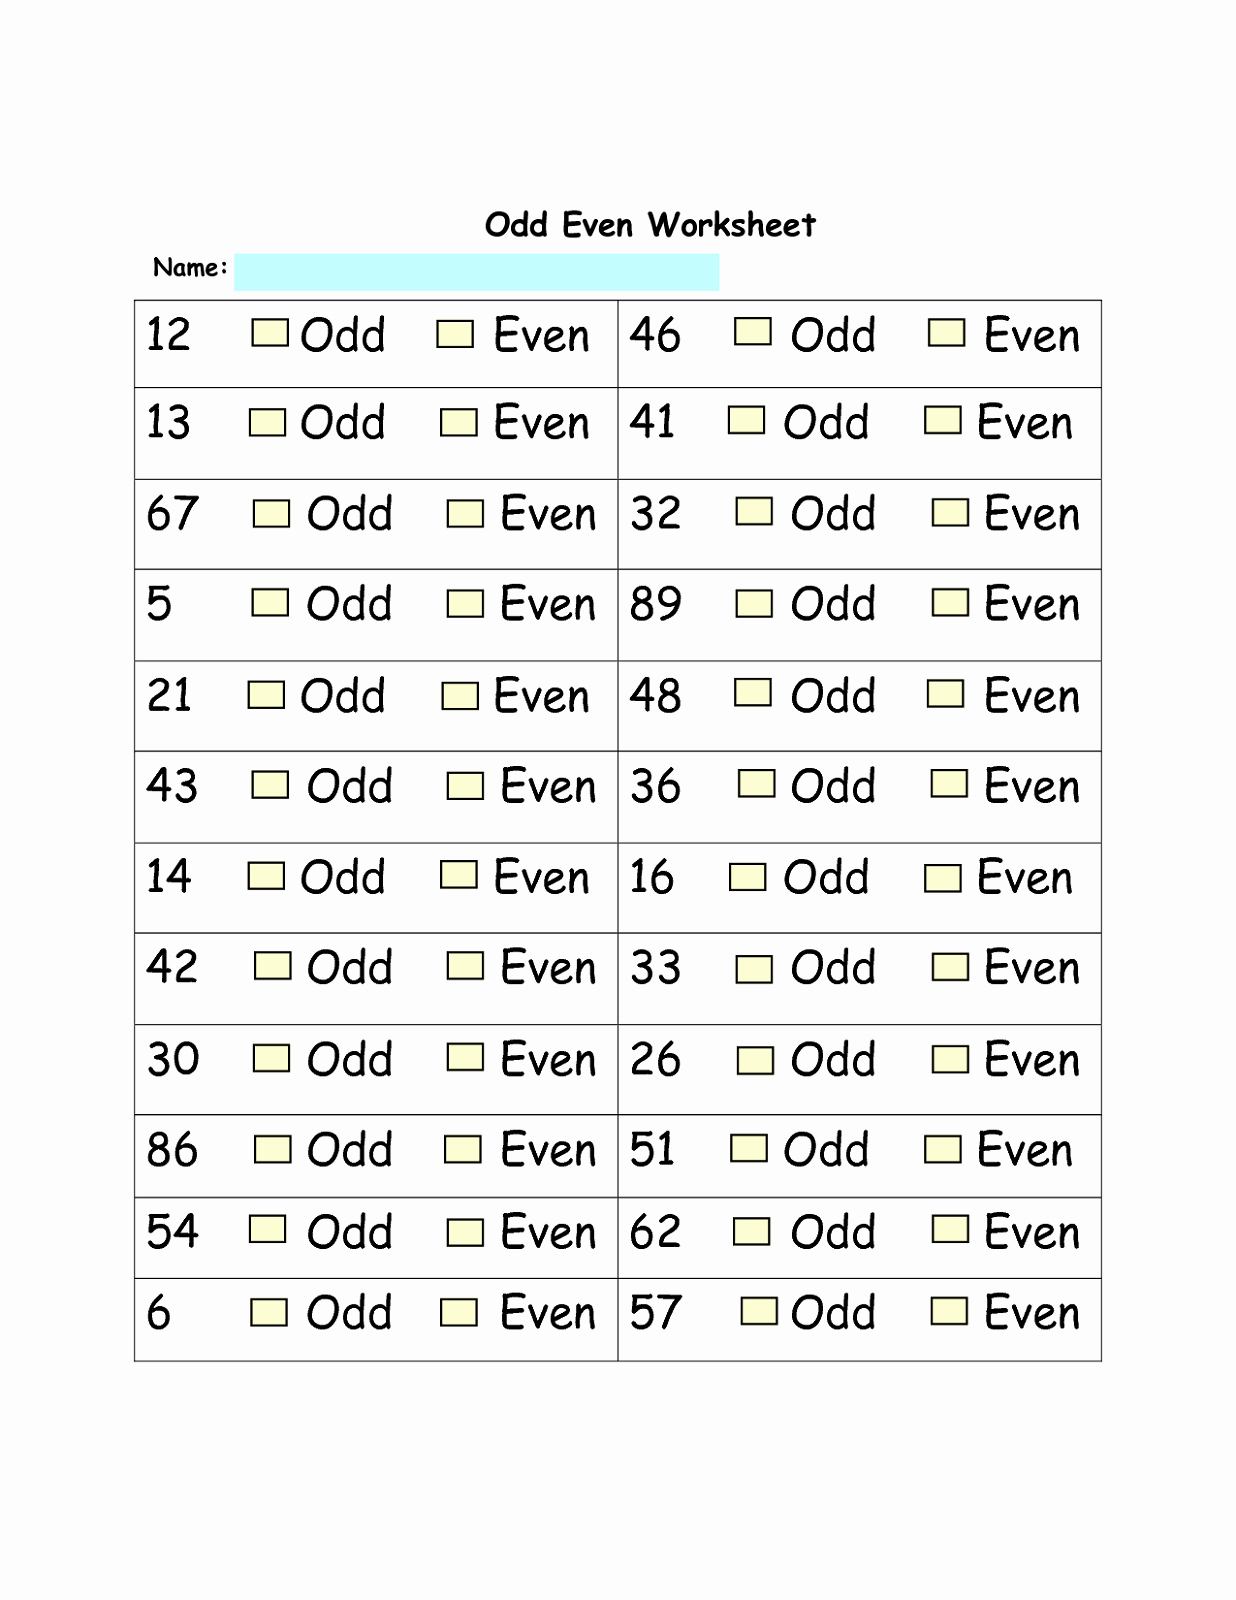 Odds and even Worksheet Luxury Free even Odd Worksheets